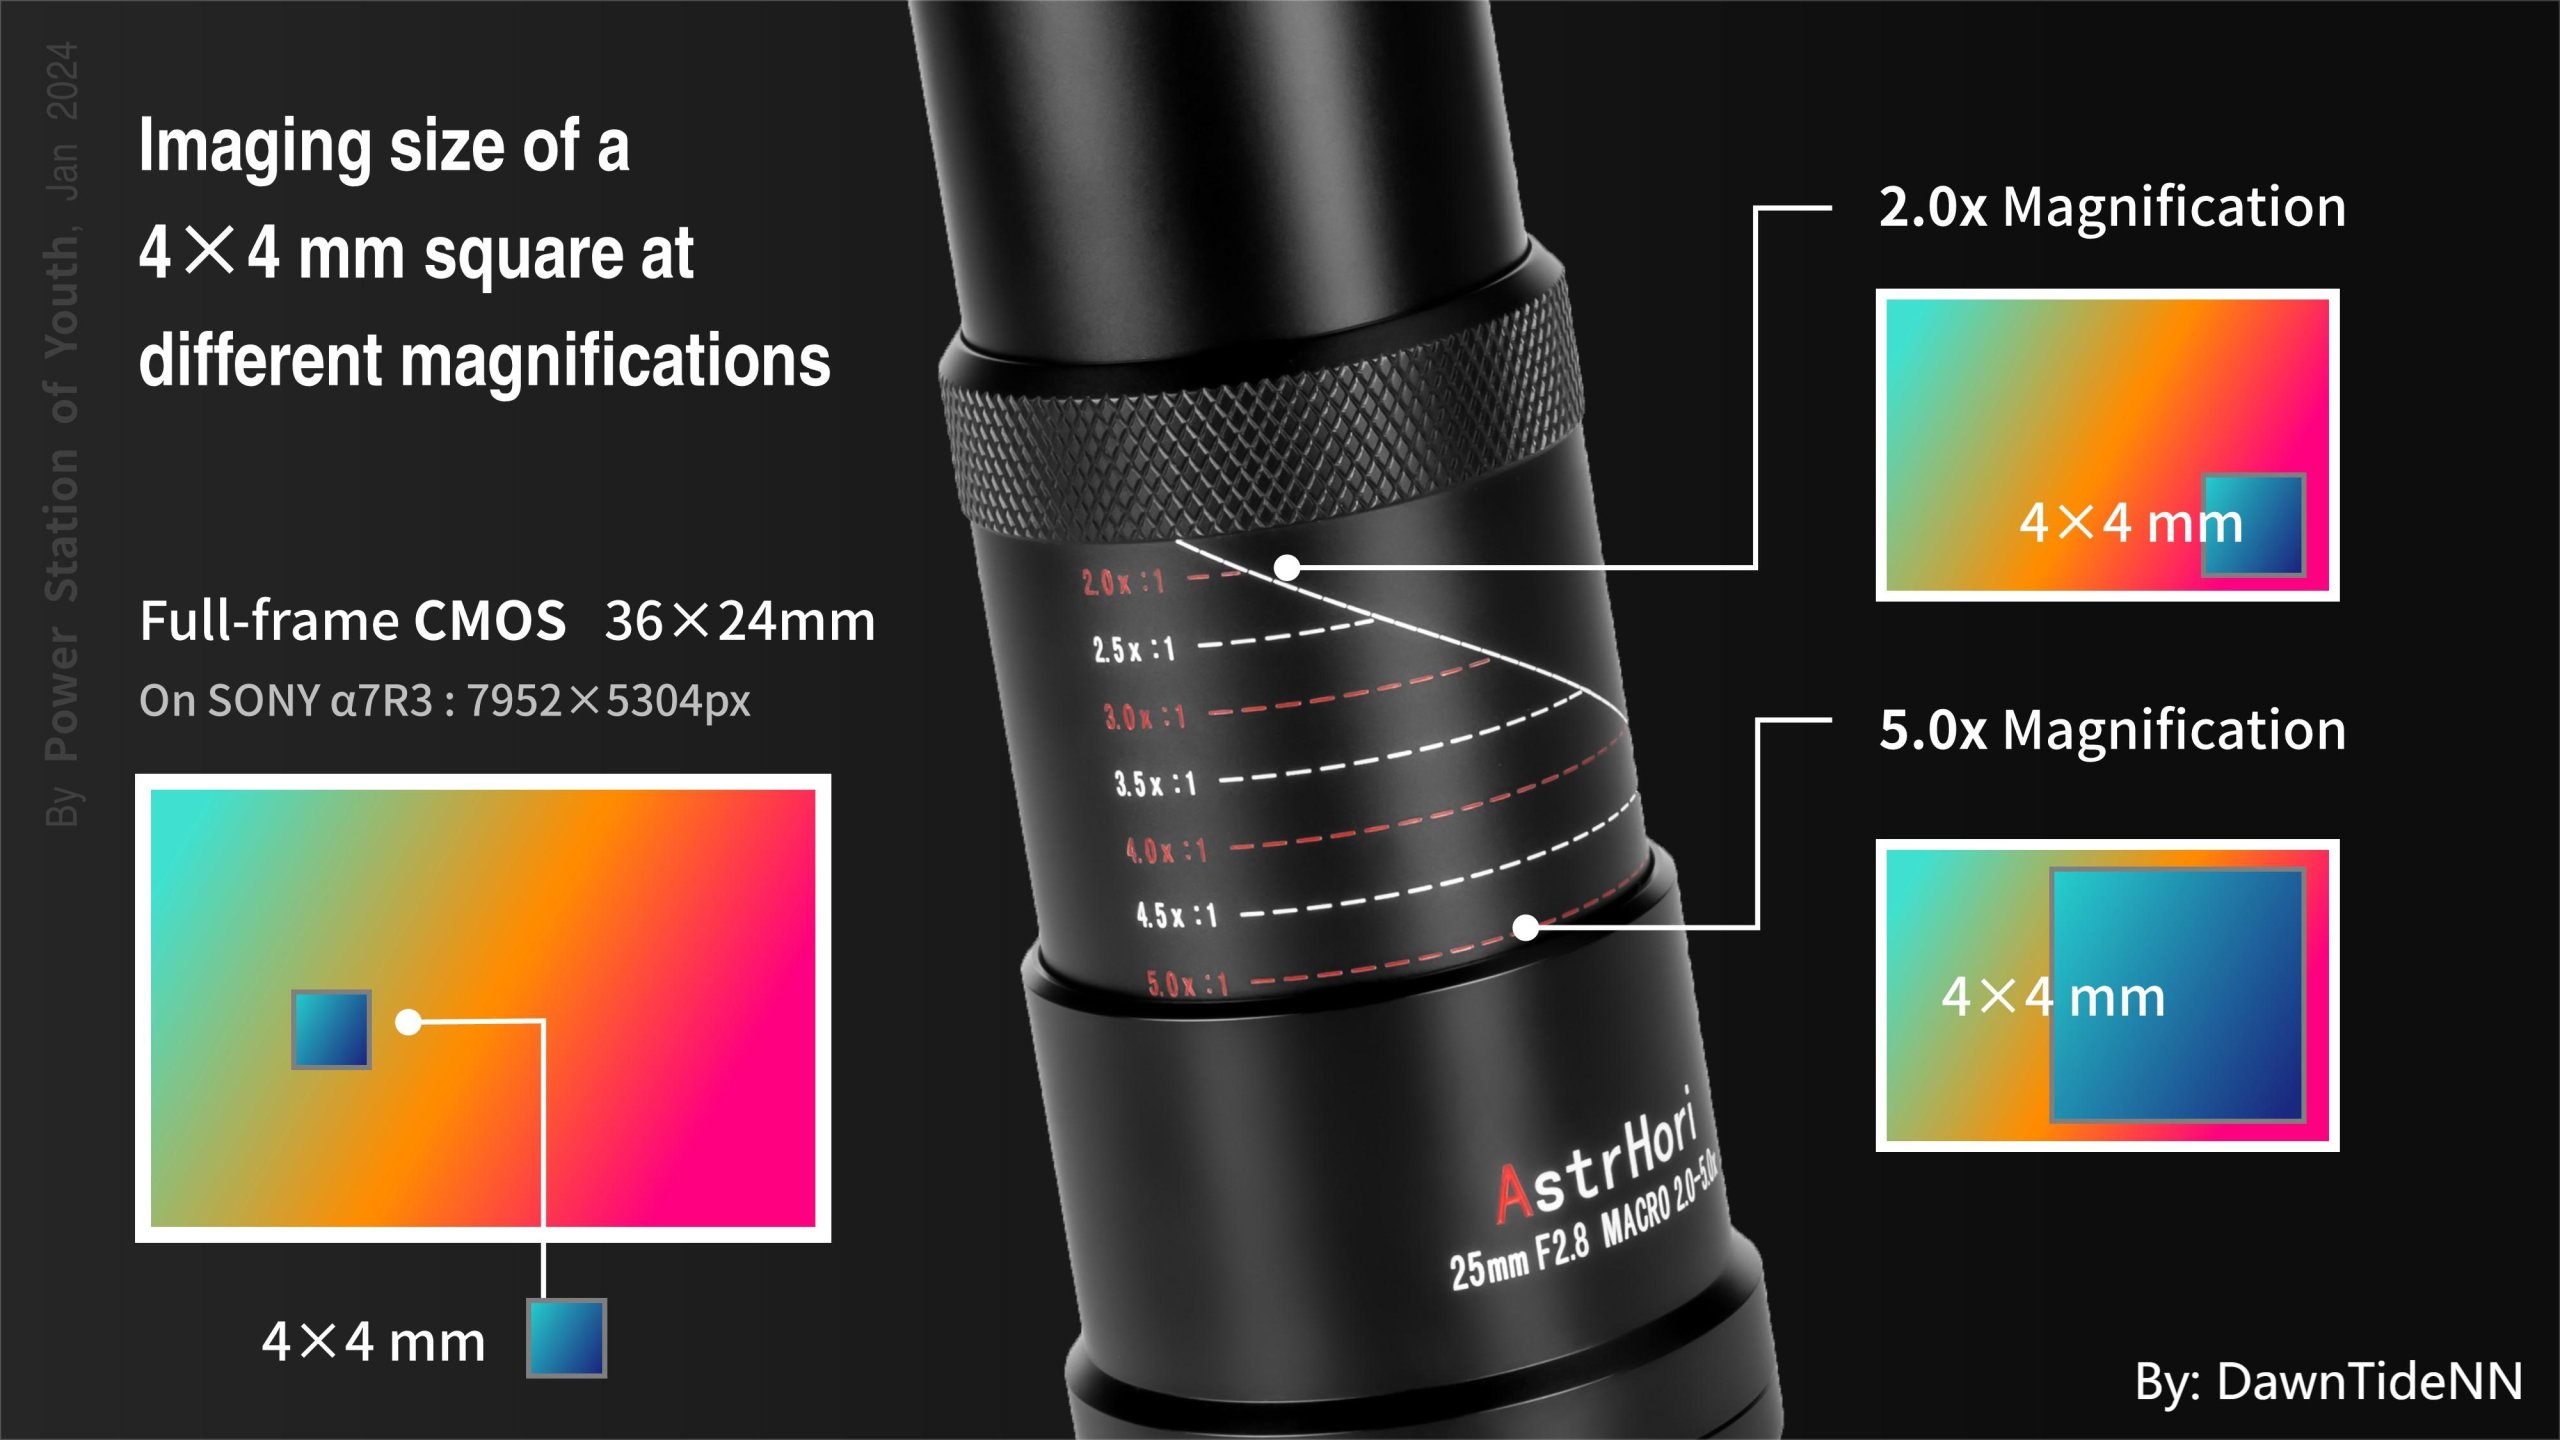 25mm scaled - AstrHori to launch RF 25mm f/2.8 2x-5x Macro Lens for $249